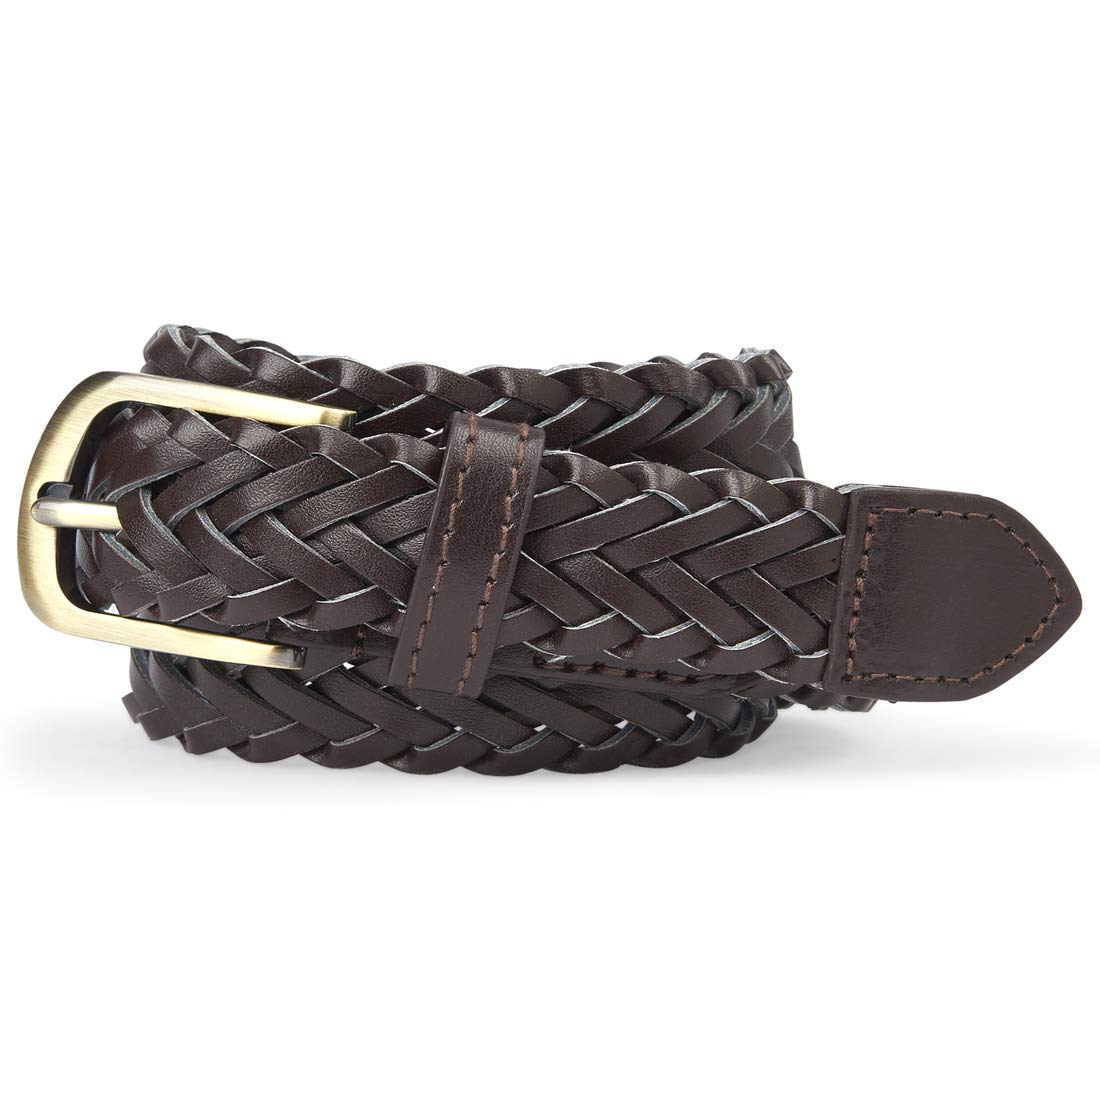 The Children's Place Boys Braided Belt (Brown, Various Sizes) $4.78 + Free Shipping w/ Prime or on $35+